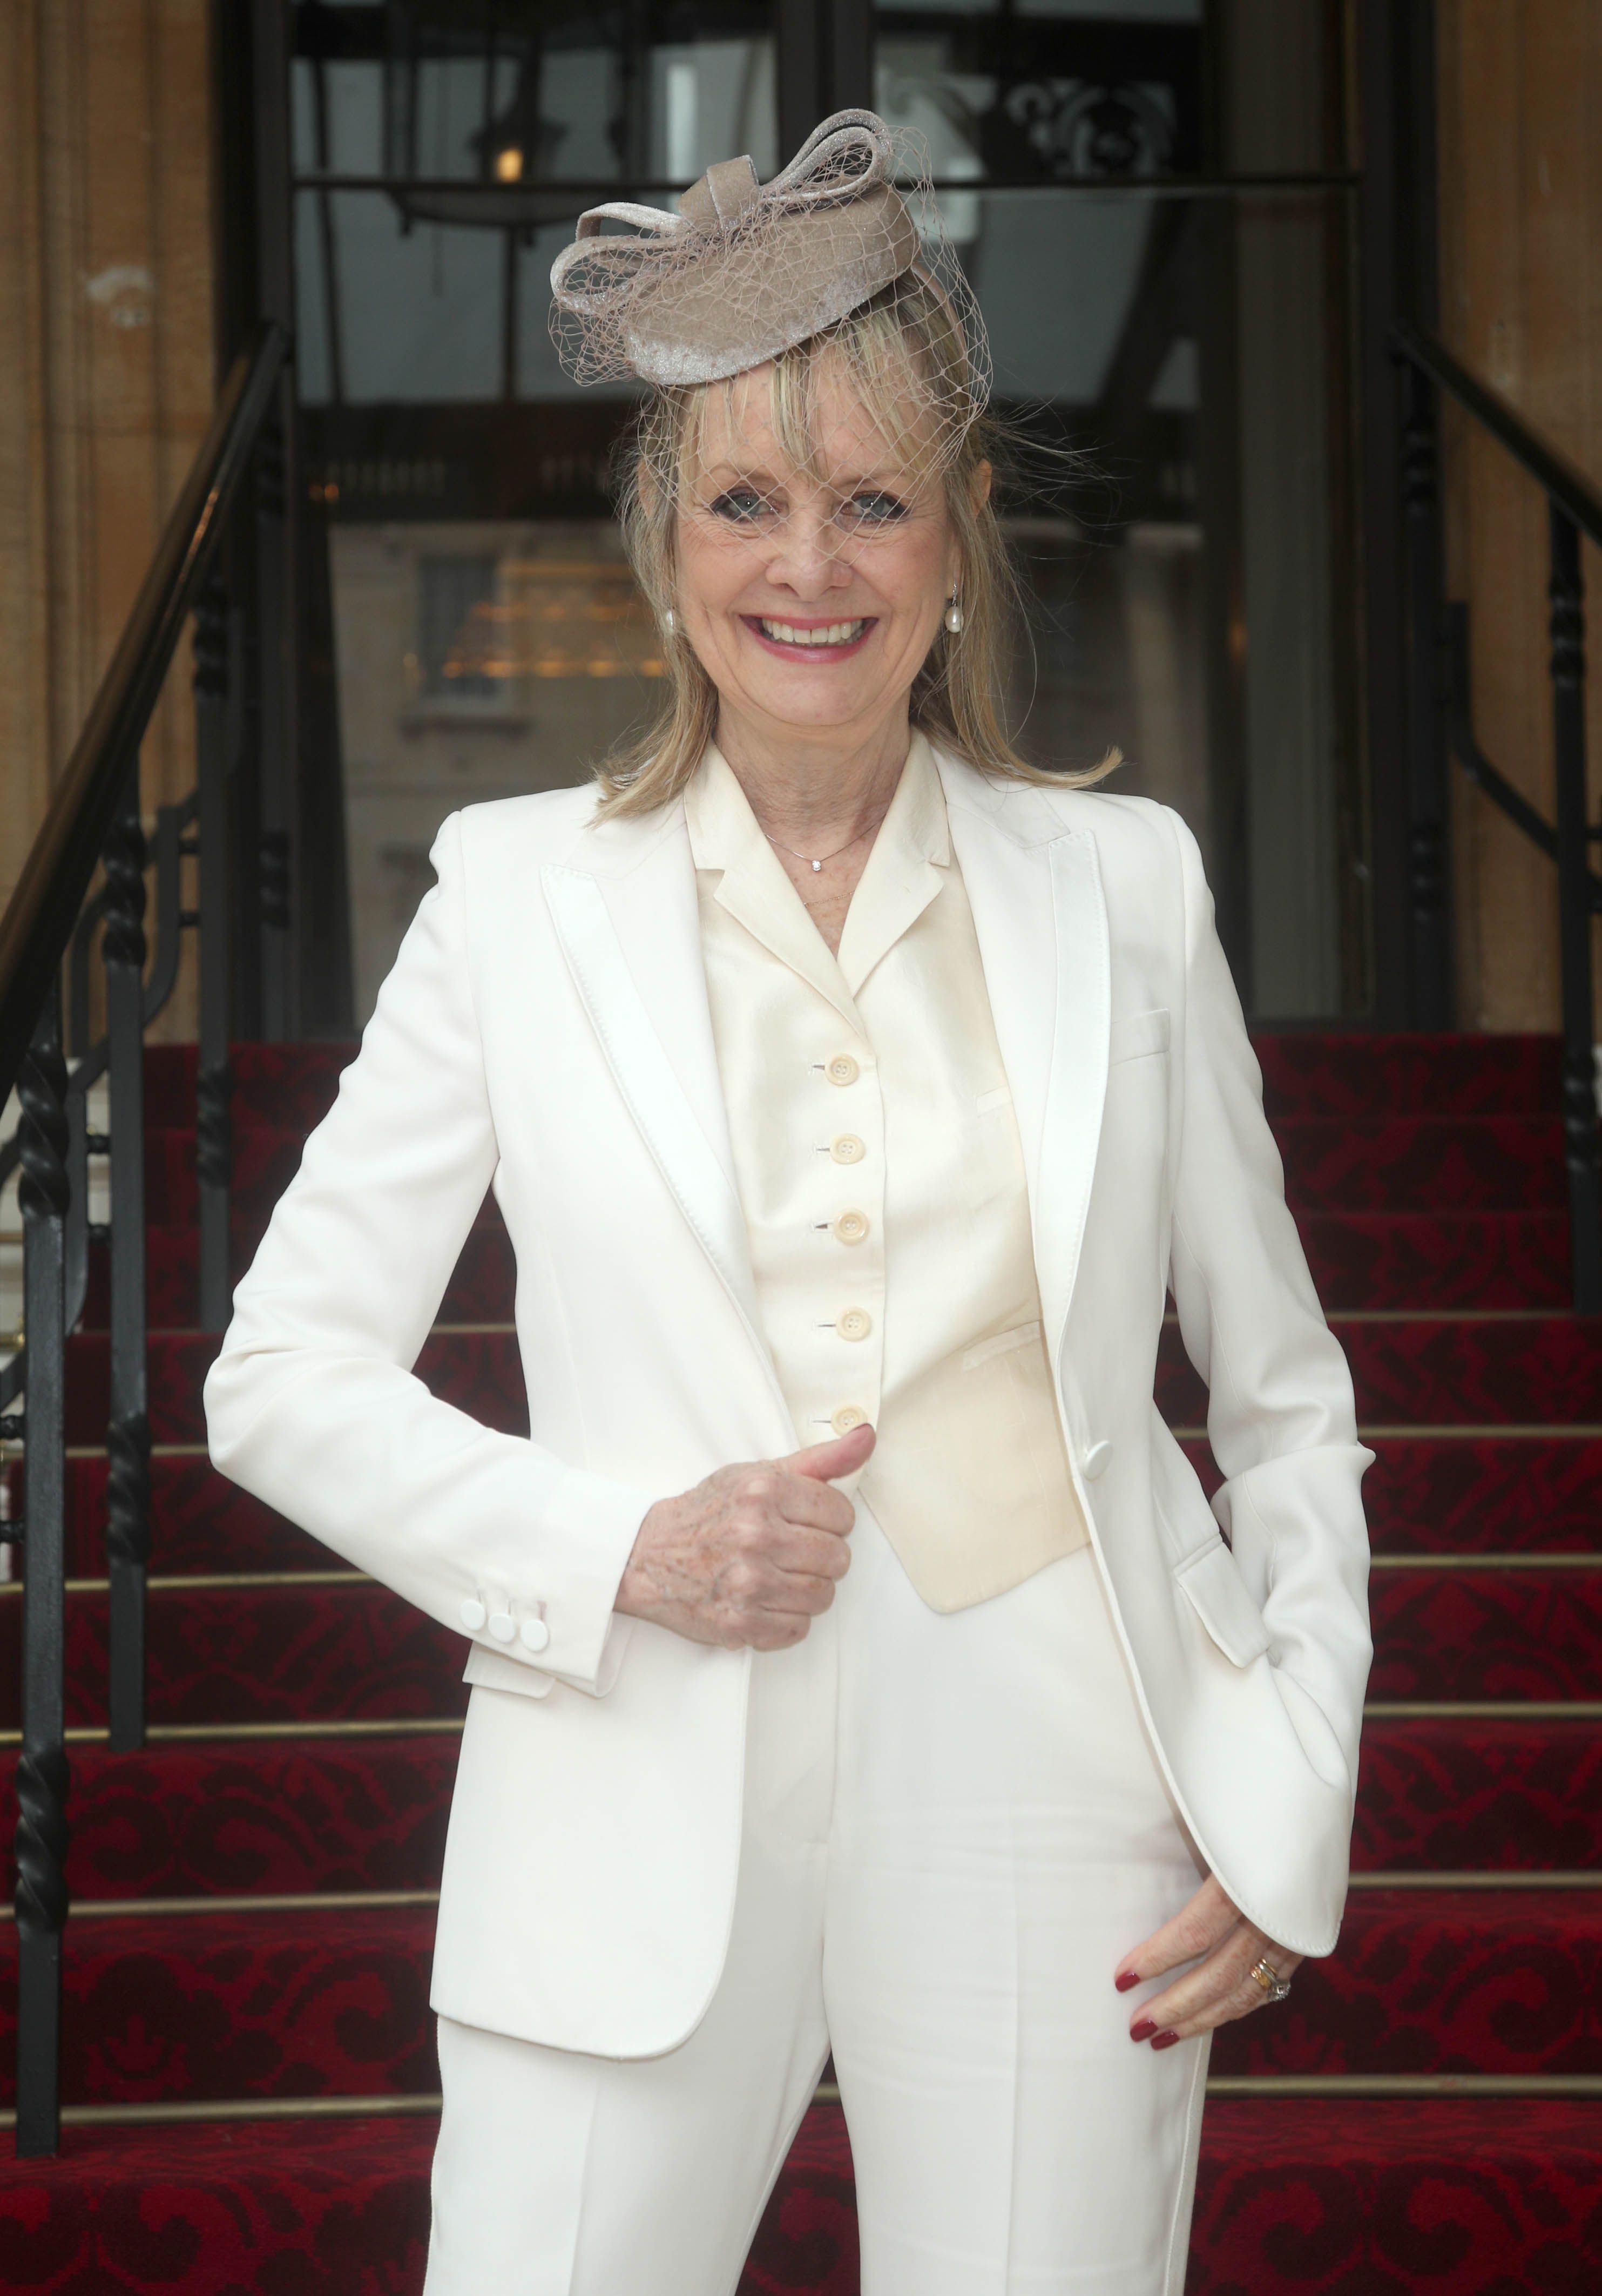 Lesley "Twiggy" Lawson arrives at Buckingham Palace where she will be made a Dame Commander of the Order of the British Empire for services to fashion, the arts and charity, during an Investiture ceremony conducted by the Prince of Wales on March 14, 2019 in London, England. | Source: Getty Images